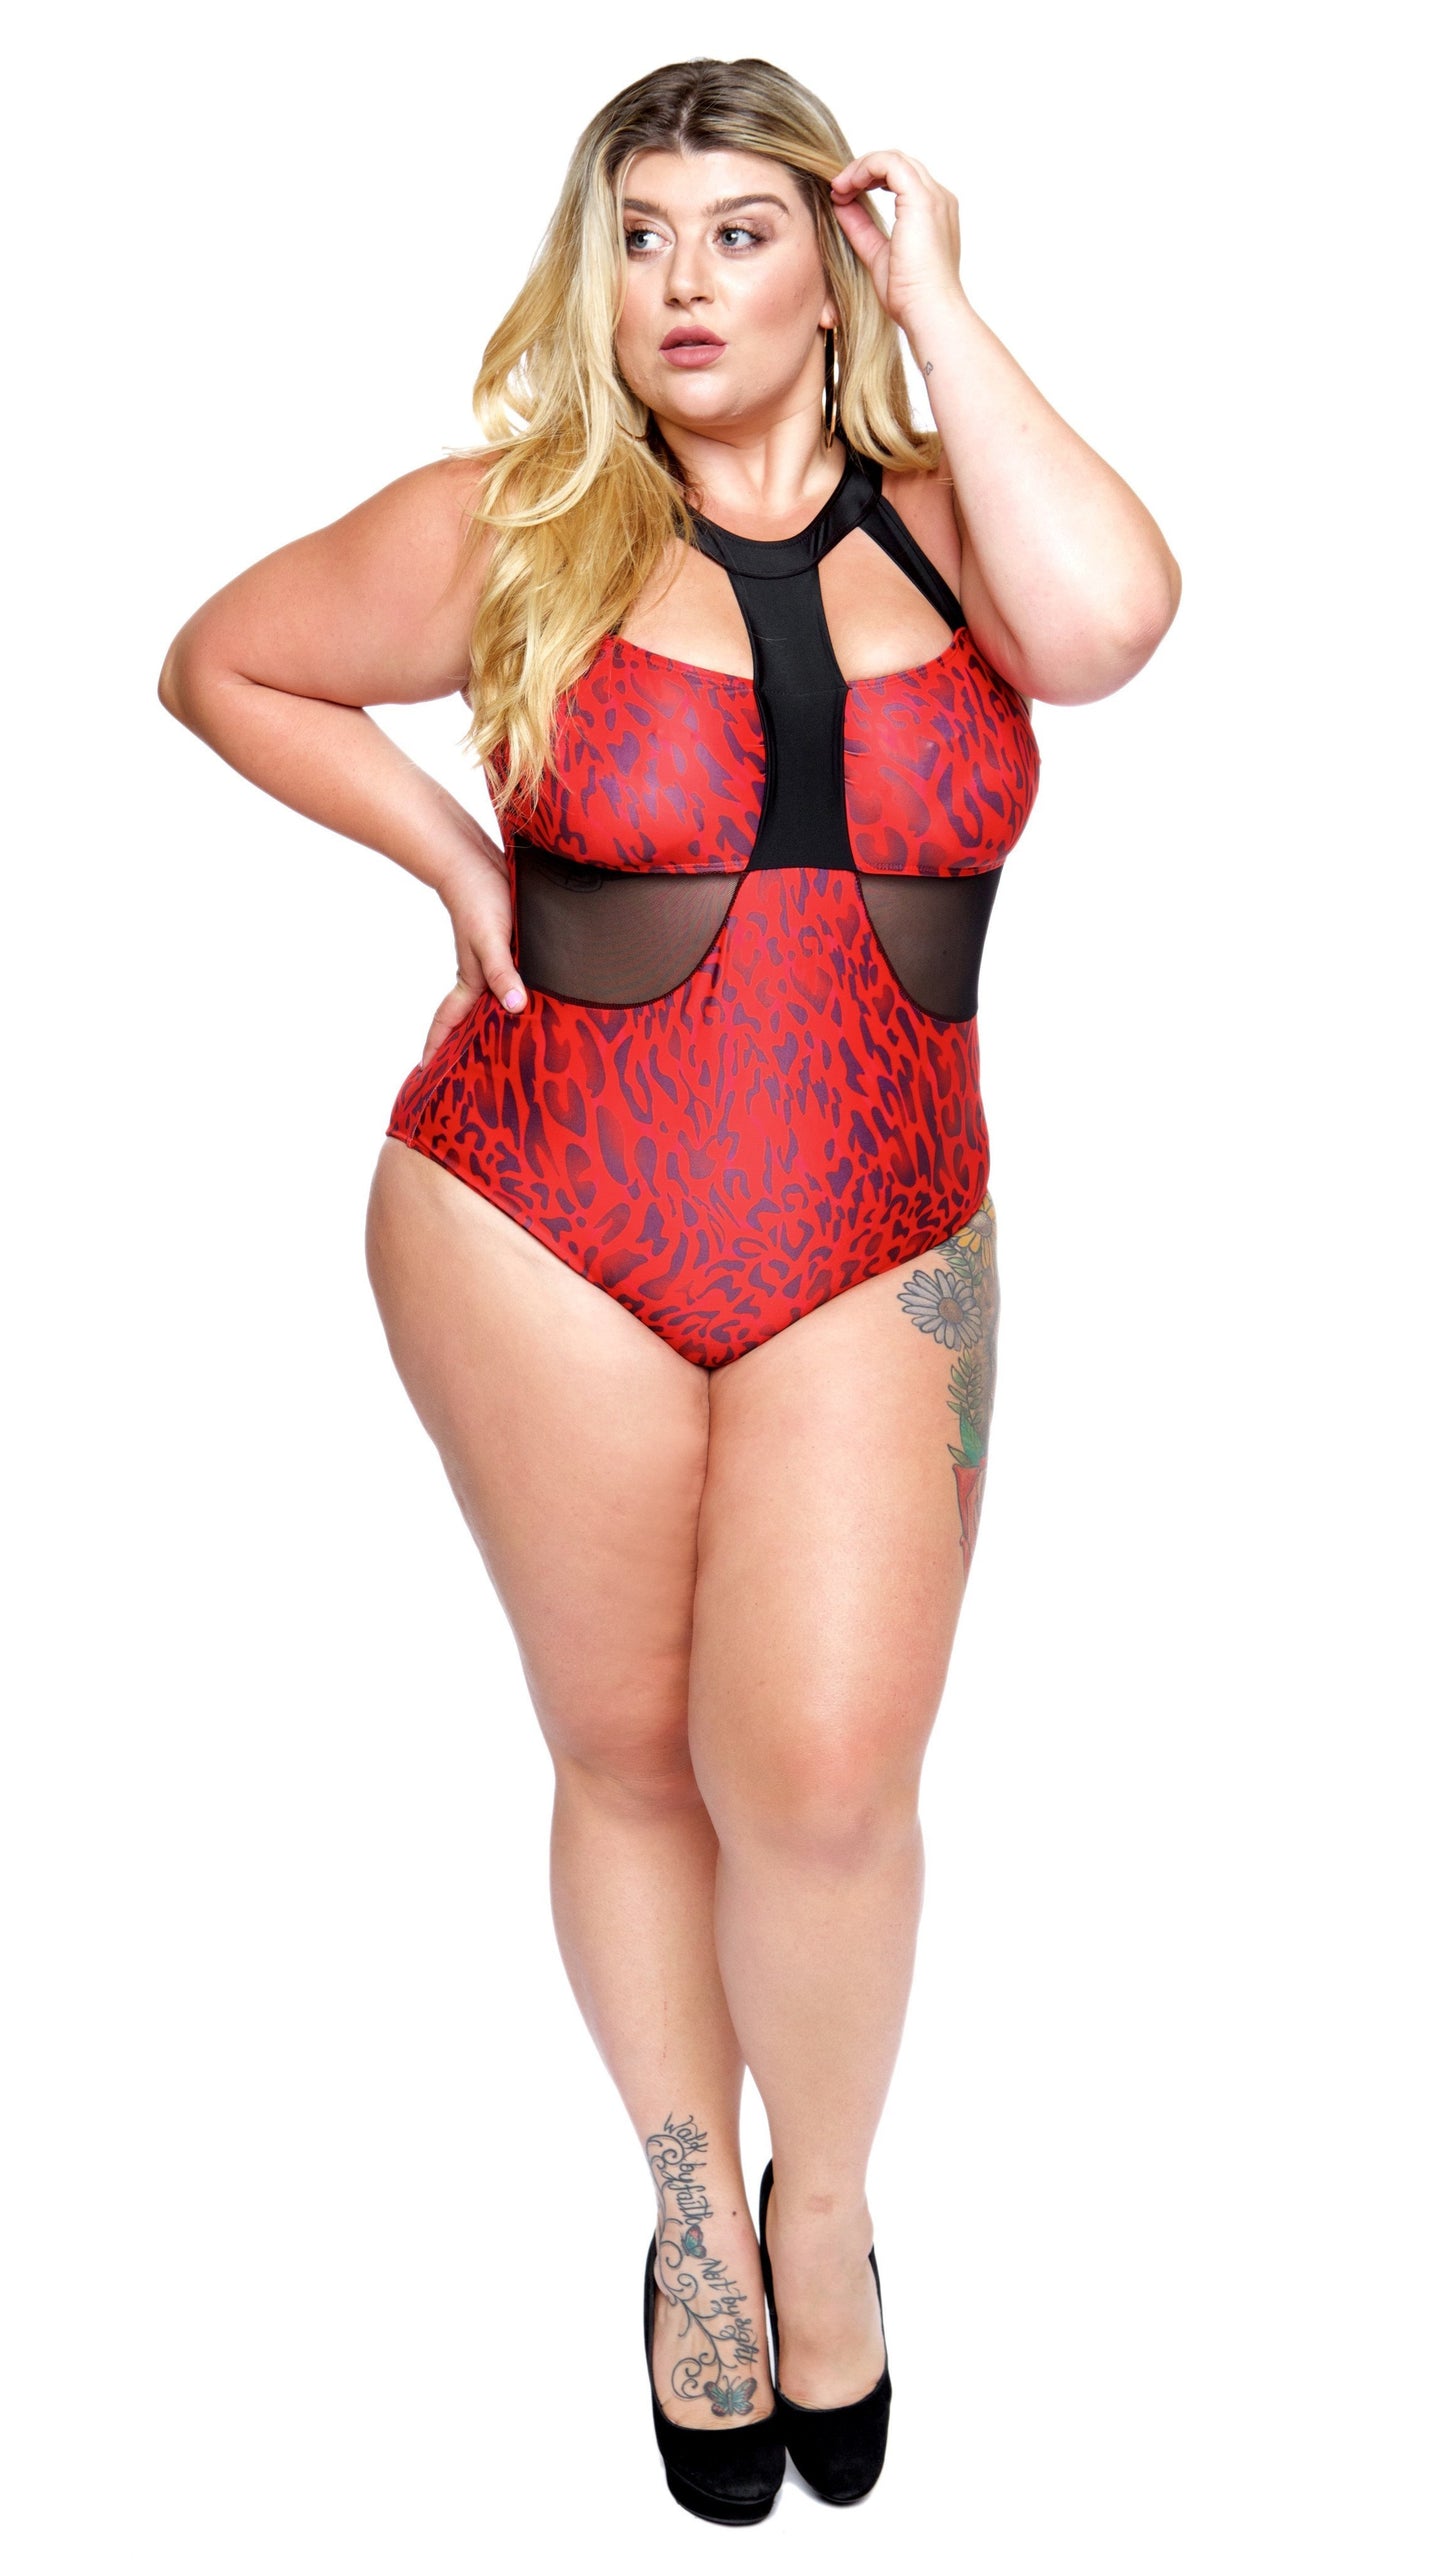 Vicious One Piece Bathing Suit (Red Leopard)-Swimwear-Boughie-Boughie